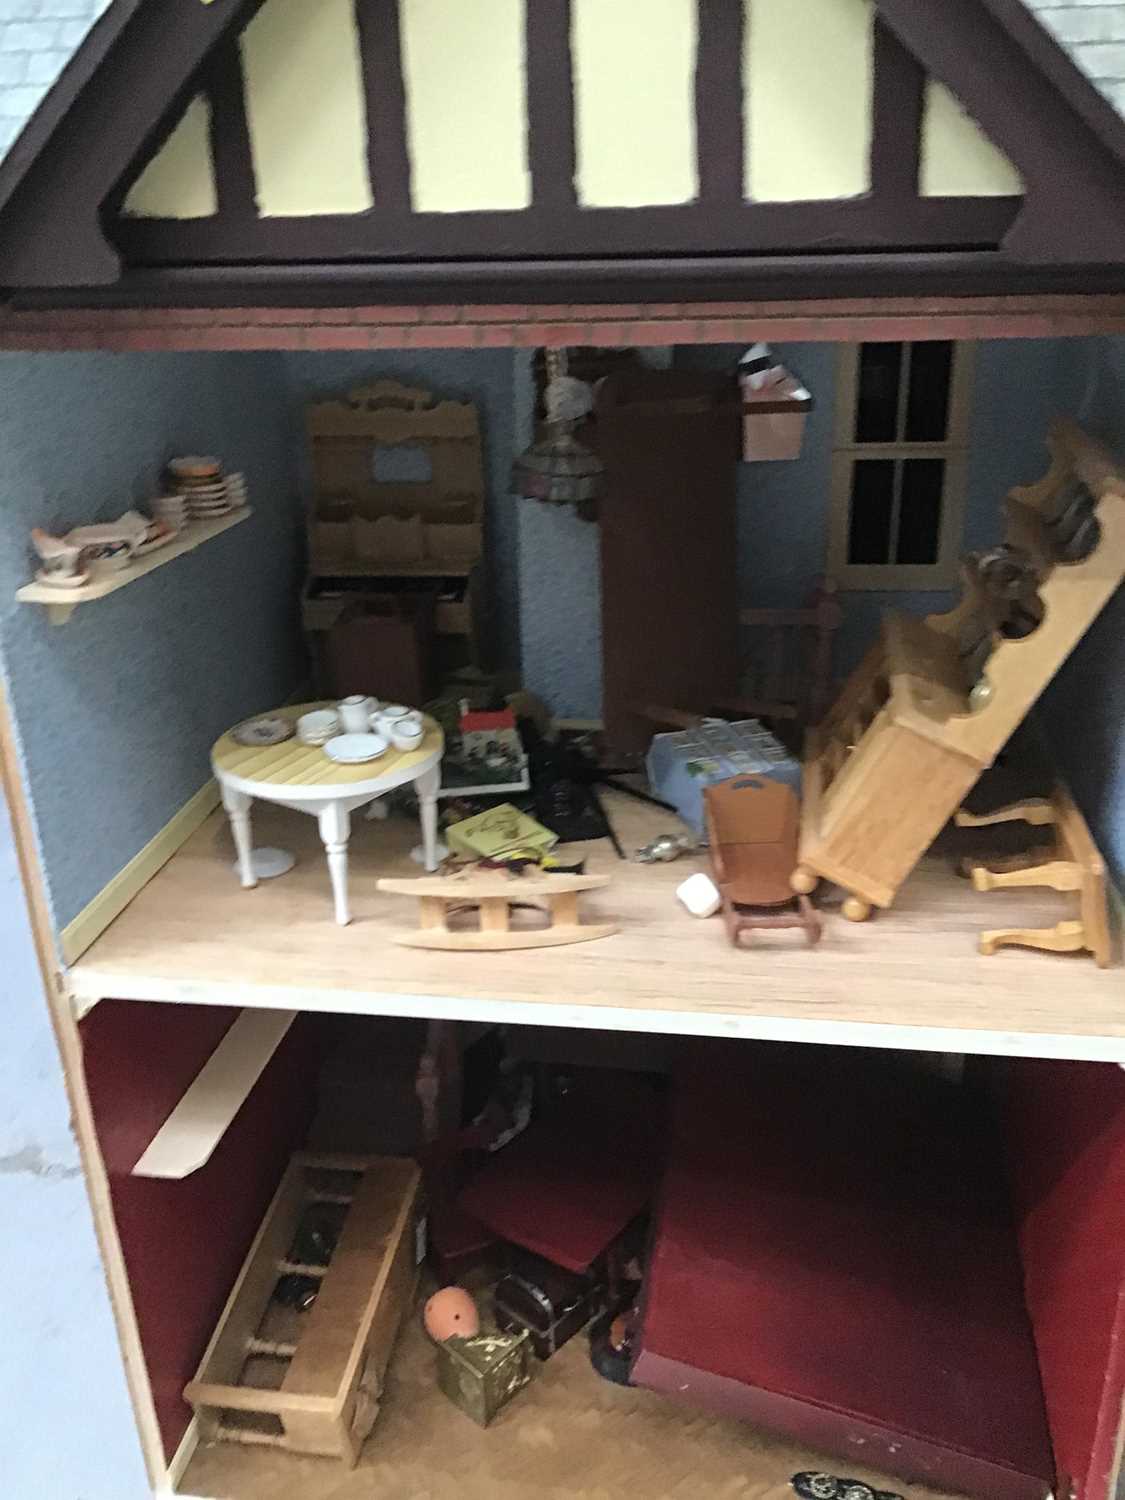 Model Antique shop with contents. - Image 4 of 4